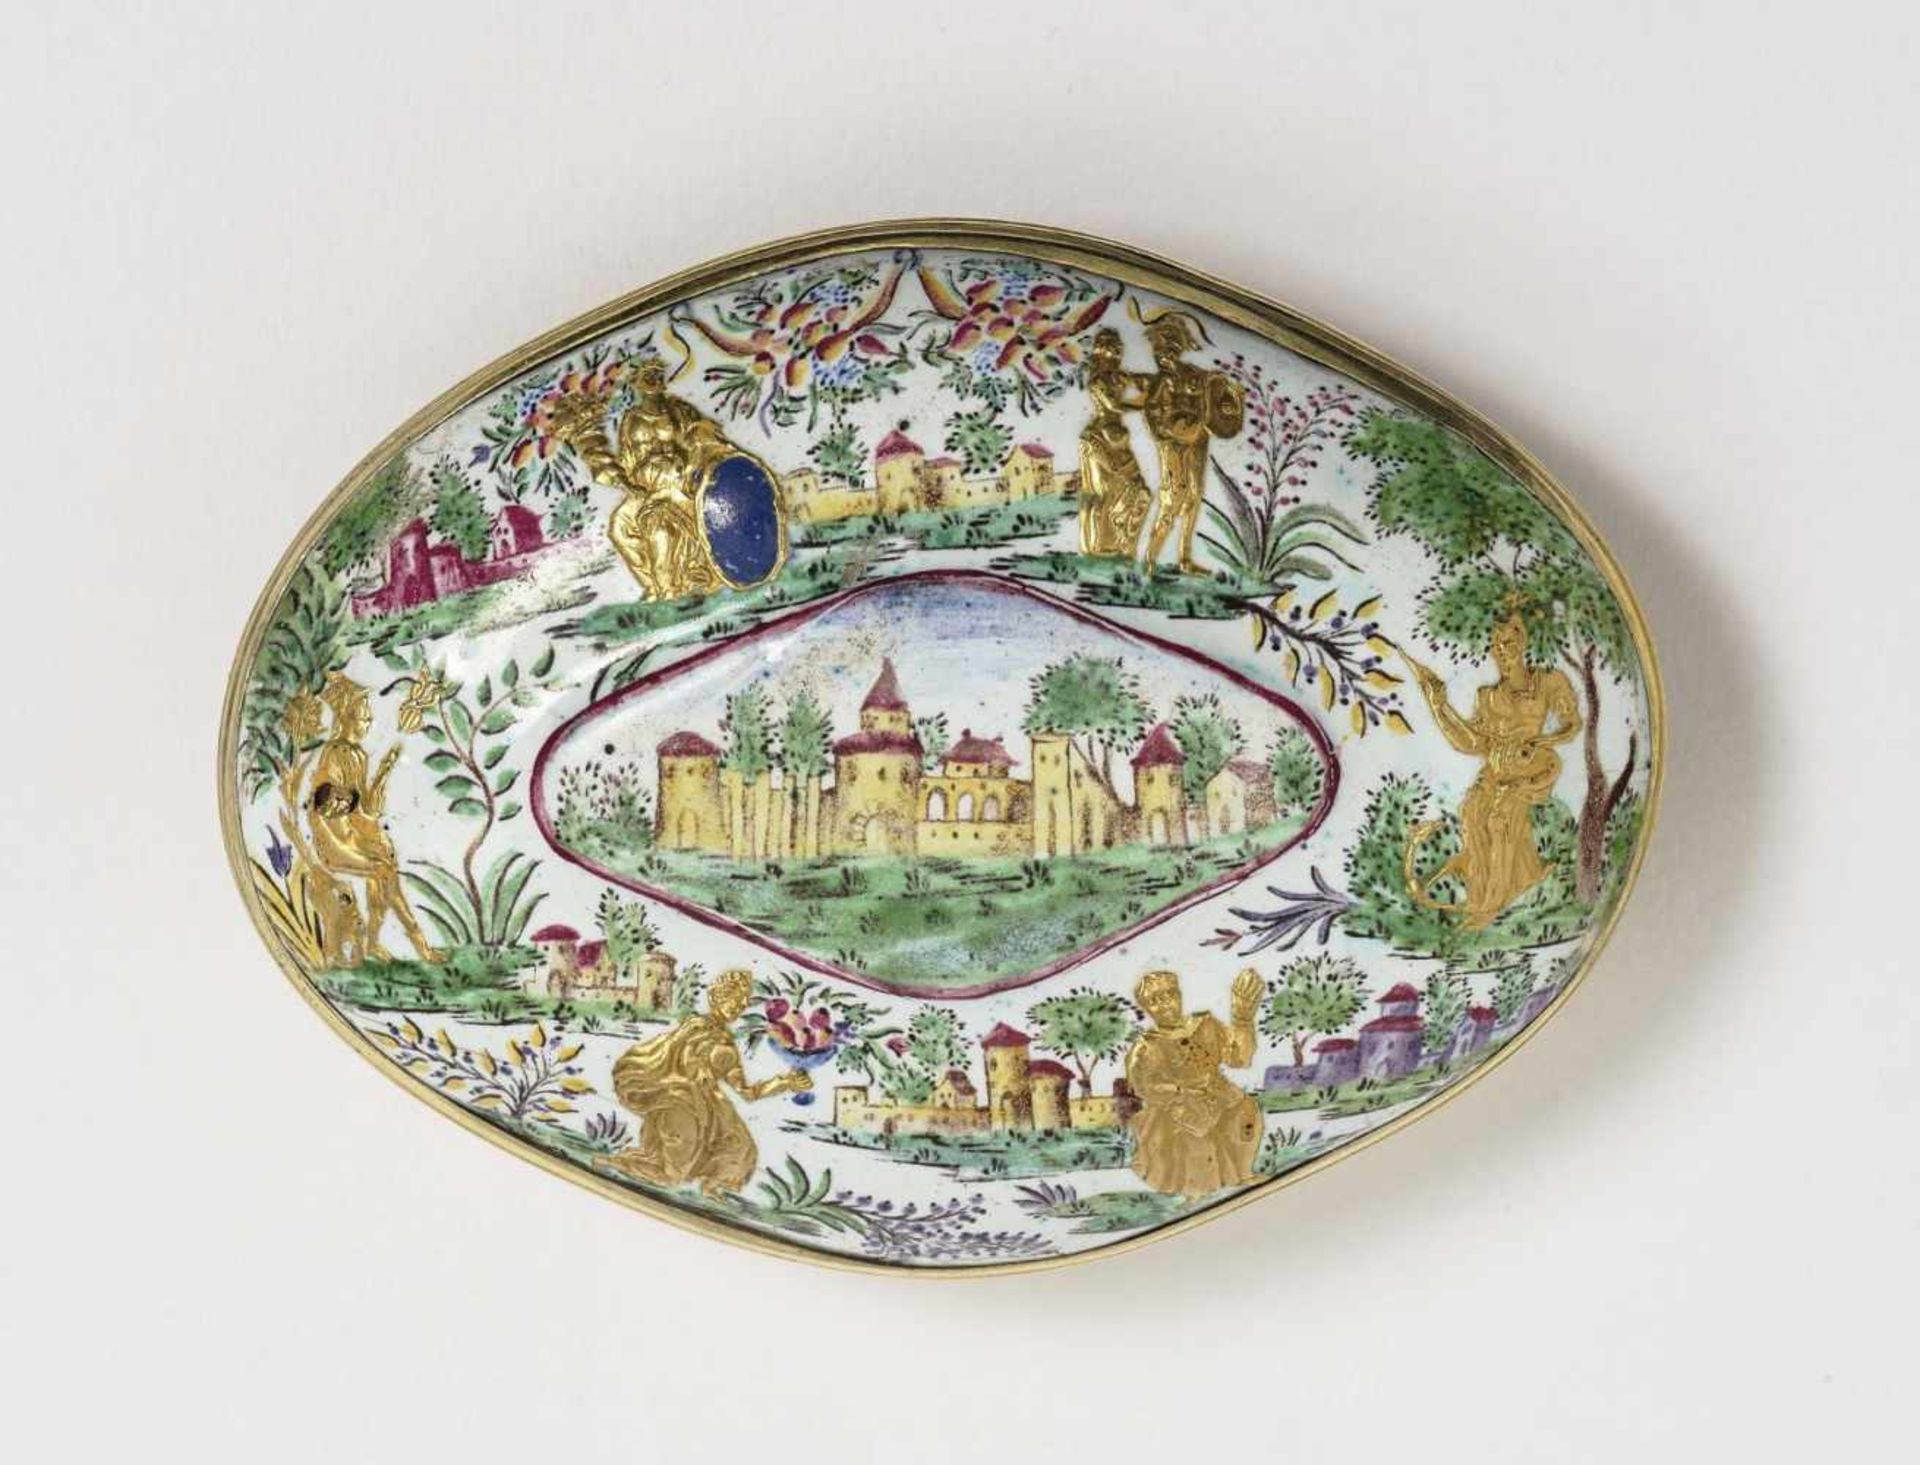 A Snuff BoxBerlin or Meißen, 2nd third of the 18th Century, probably workshop of Fromery 'Email de - Bild 2 aus 2